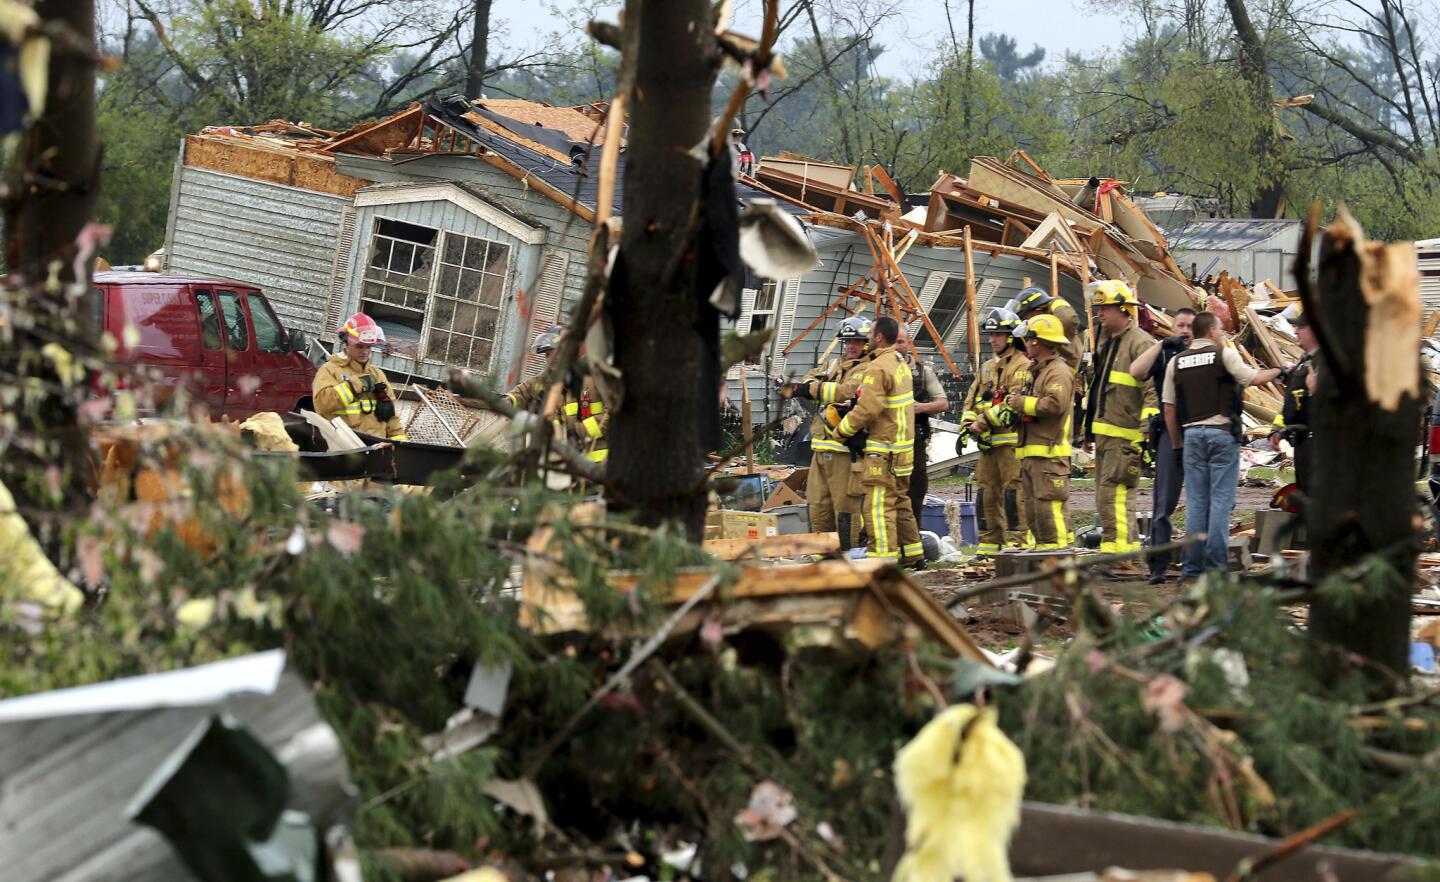 Firefighters work the site of the damage after a tornado ripped through Prairie Lake Estates trailer home park, just north of Chetek, Wis., Tuesday, May 16, 2017. The tornado swept into the mobile home park in western Wisconsin on Tuesday, as a storm system also pounded parts of at least seven states from Texas to near the Canadian border with heavy rain, high winds and hail.